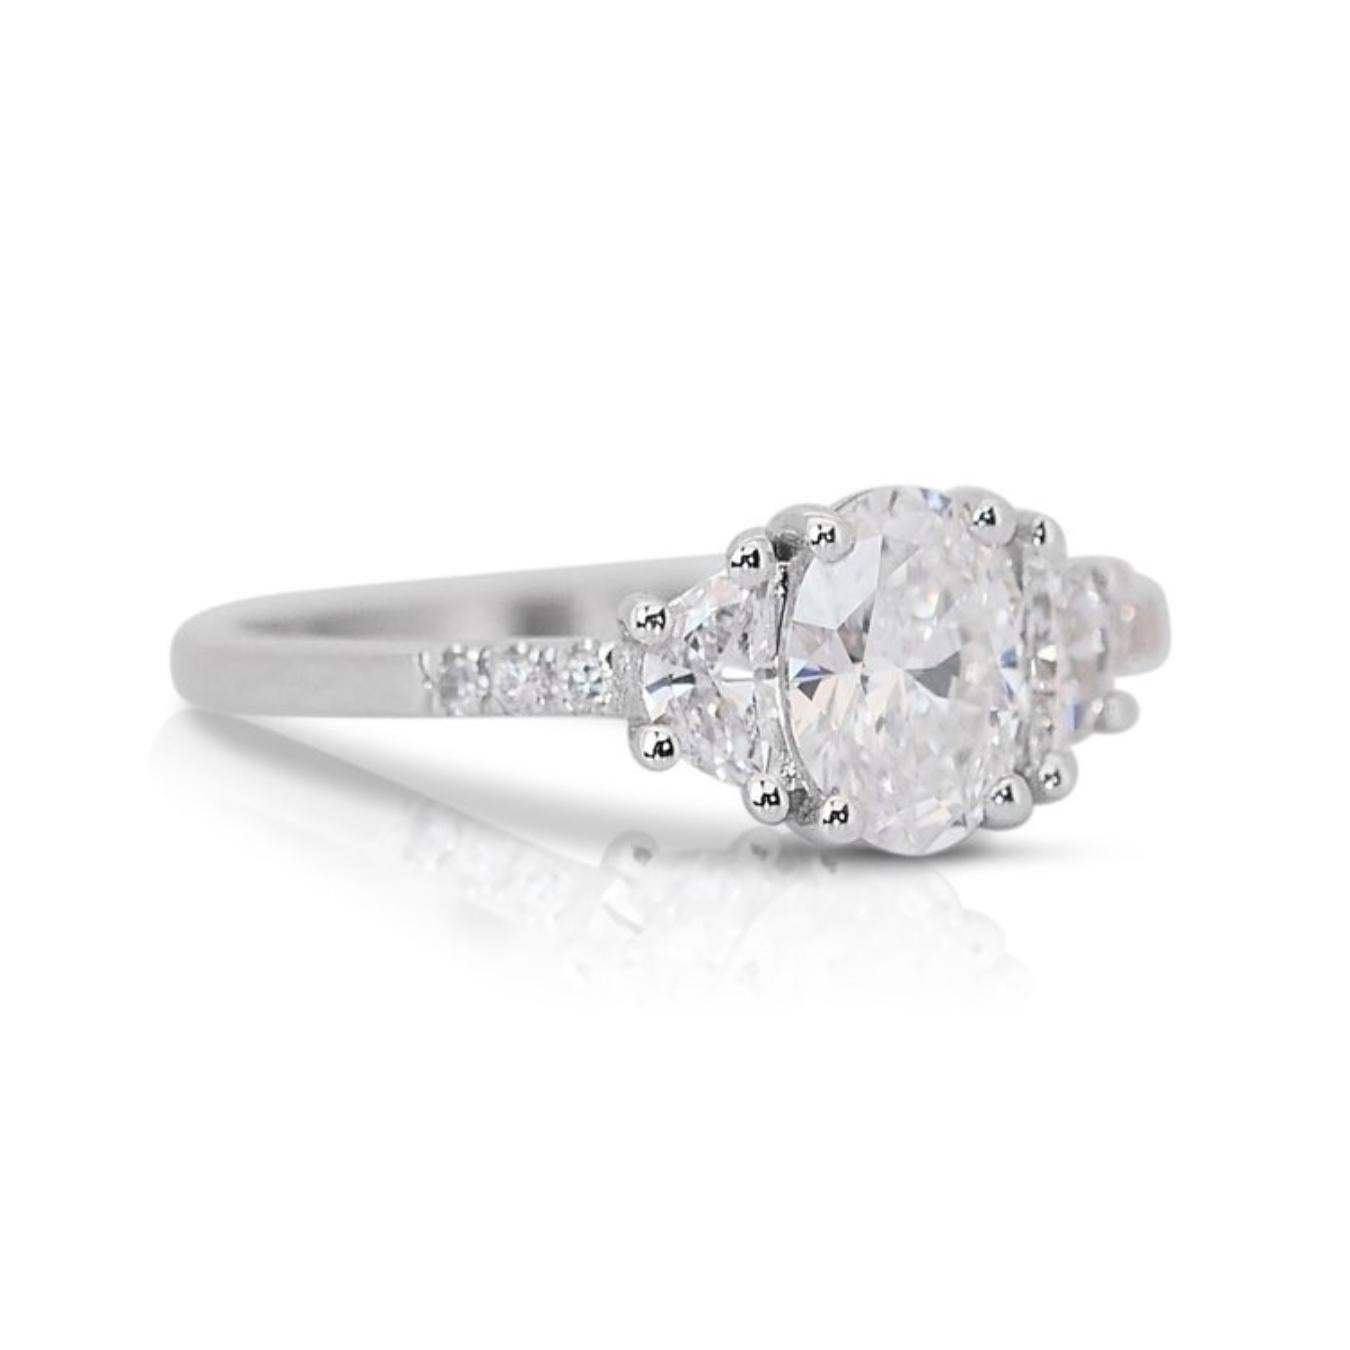 Lustrous 18k White Gold Natural Diamond Pave Ring w/1.04 ct - GIA Certified

This captivating 18k white gold ring features a stunning 0.77 carat oval diamond at its center. The center stone is complemented by shimmering pave-set diamonds, including